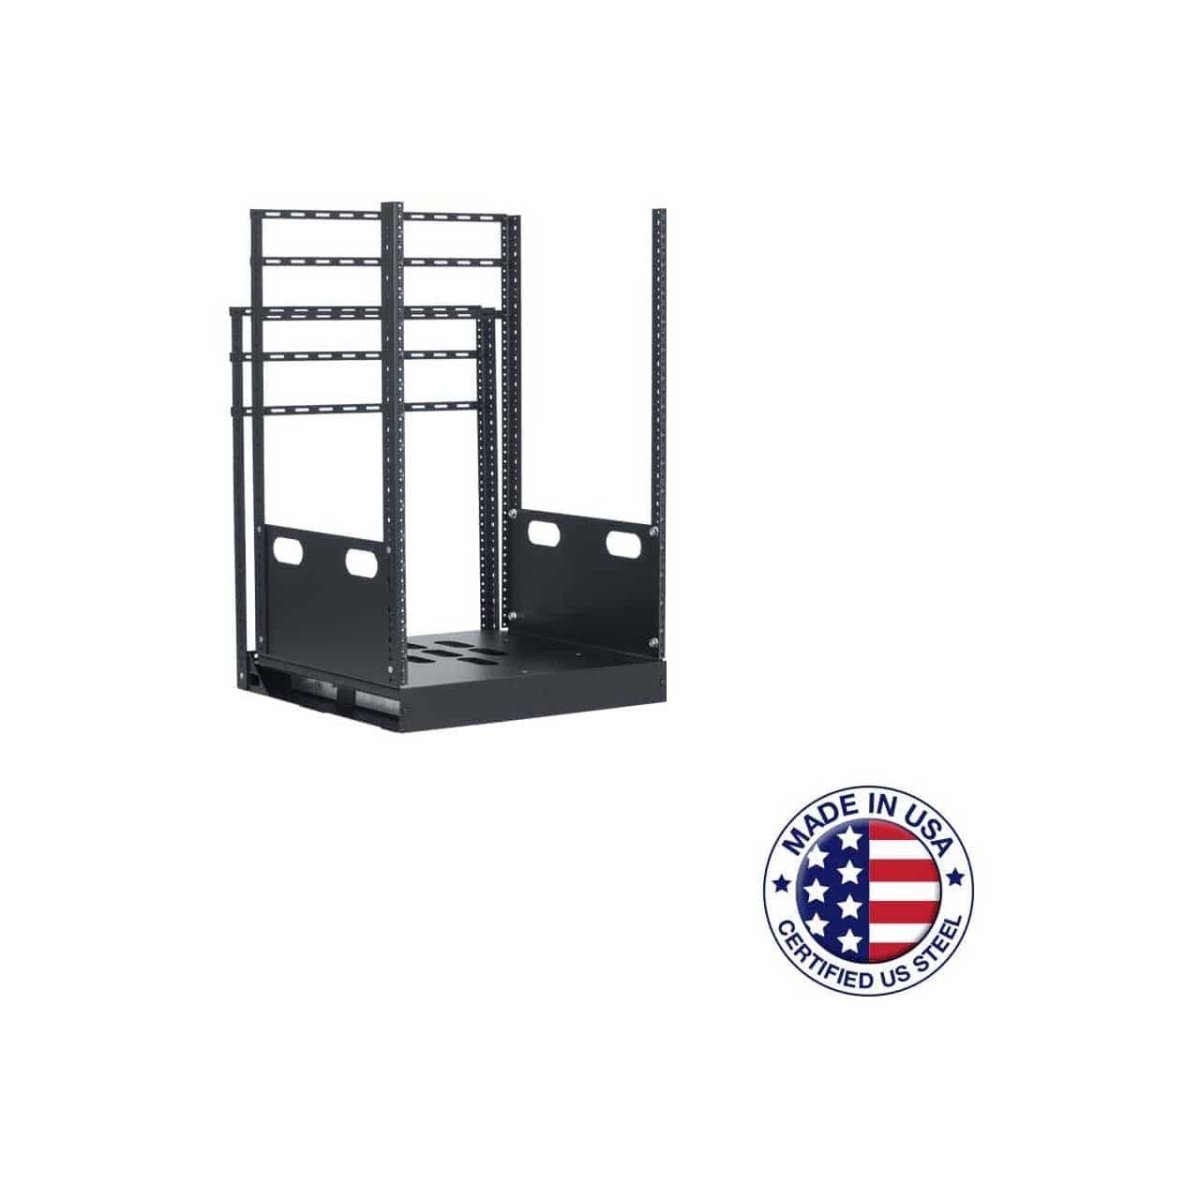 Picture of Lowell Manufacturing LMC-LPTR4-1623 LPTR4-1623 16RU Pull & Turn Millwork Rack with Four Support Rails - 23 in. Deep